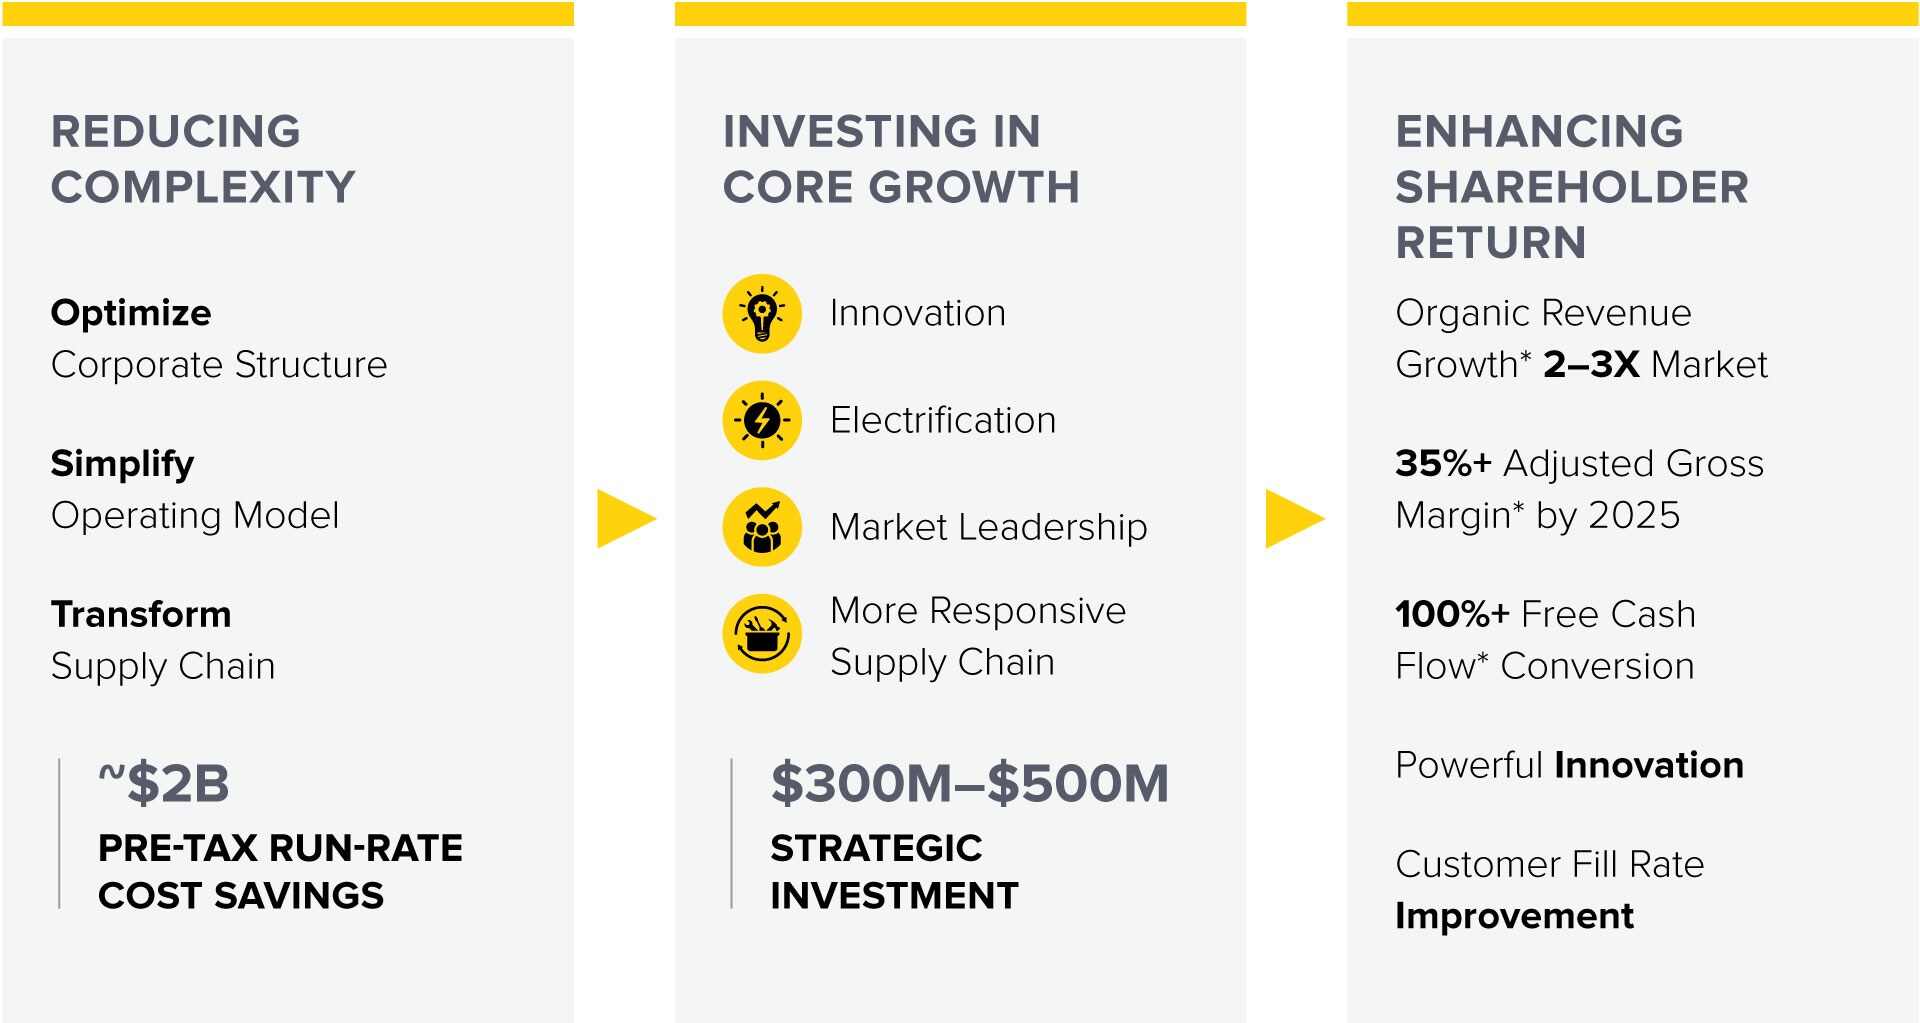 Ways in which we transform to accelerate organic growth.